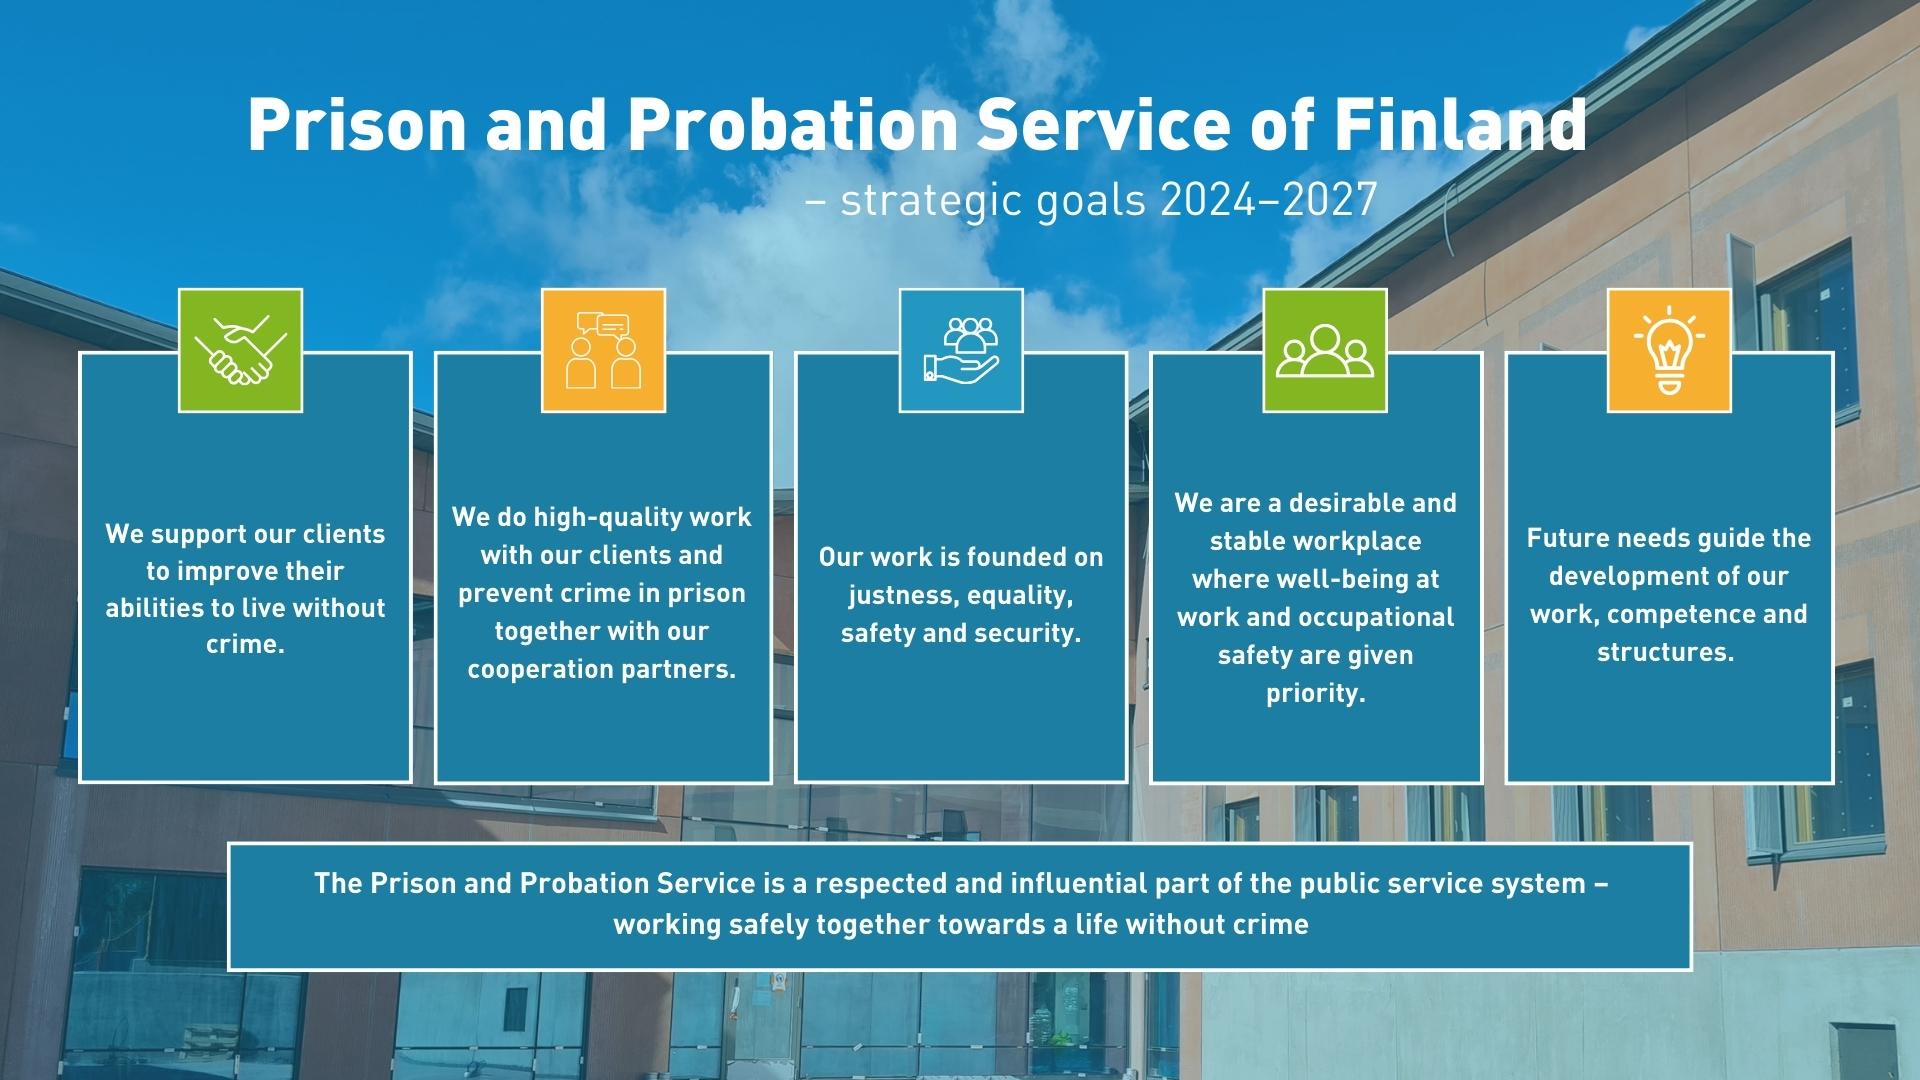 Five Strategic goals of Prison and Probation Service of Finland for the years 2024-2027. We support our clients to improve their abilities to live without crime. We do high-quality work with our clients and prevent crime in prison together with our cooperation partners. Our work is founded on justness, equality, safety and security. We are a desirable and stable workplace where well-being at work and occupational safety are given priority. Future needs guide the development of our work, competence and structures. Our vision is to be a respected and influential part of the public service system - working safely together towards a life without crime.